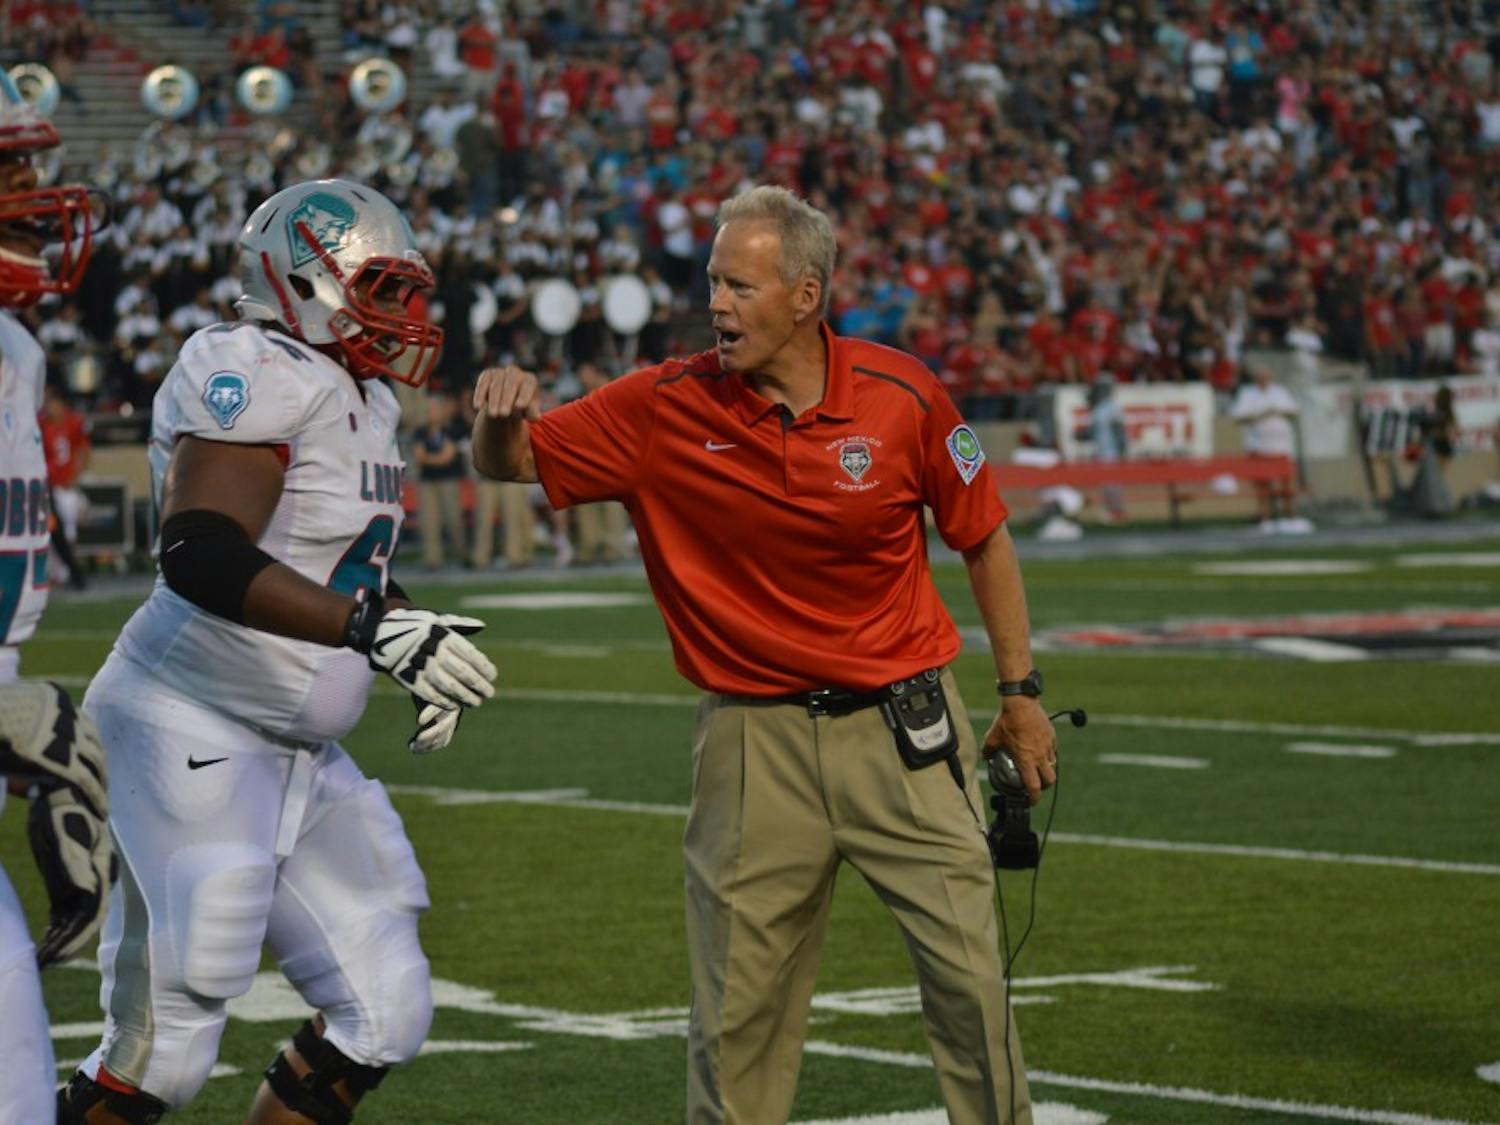 UNM Head Football Coach Bob Davie congratulates a football player after a play on Sept. 24, 2014 during a game against Fresno at University Stadium.